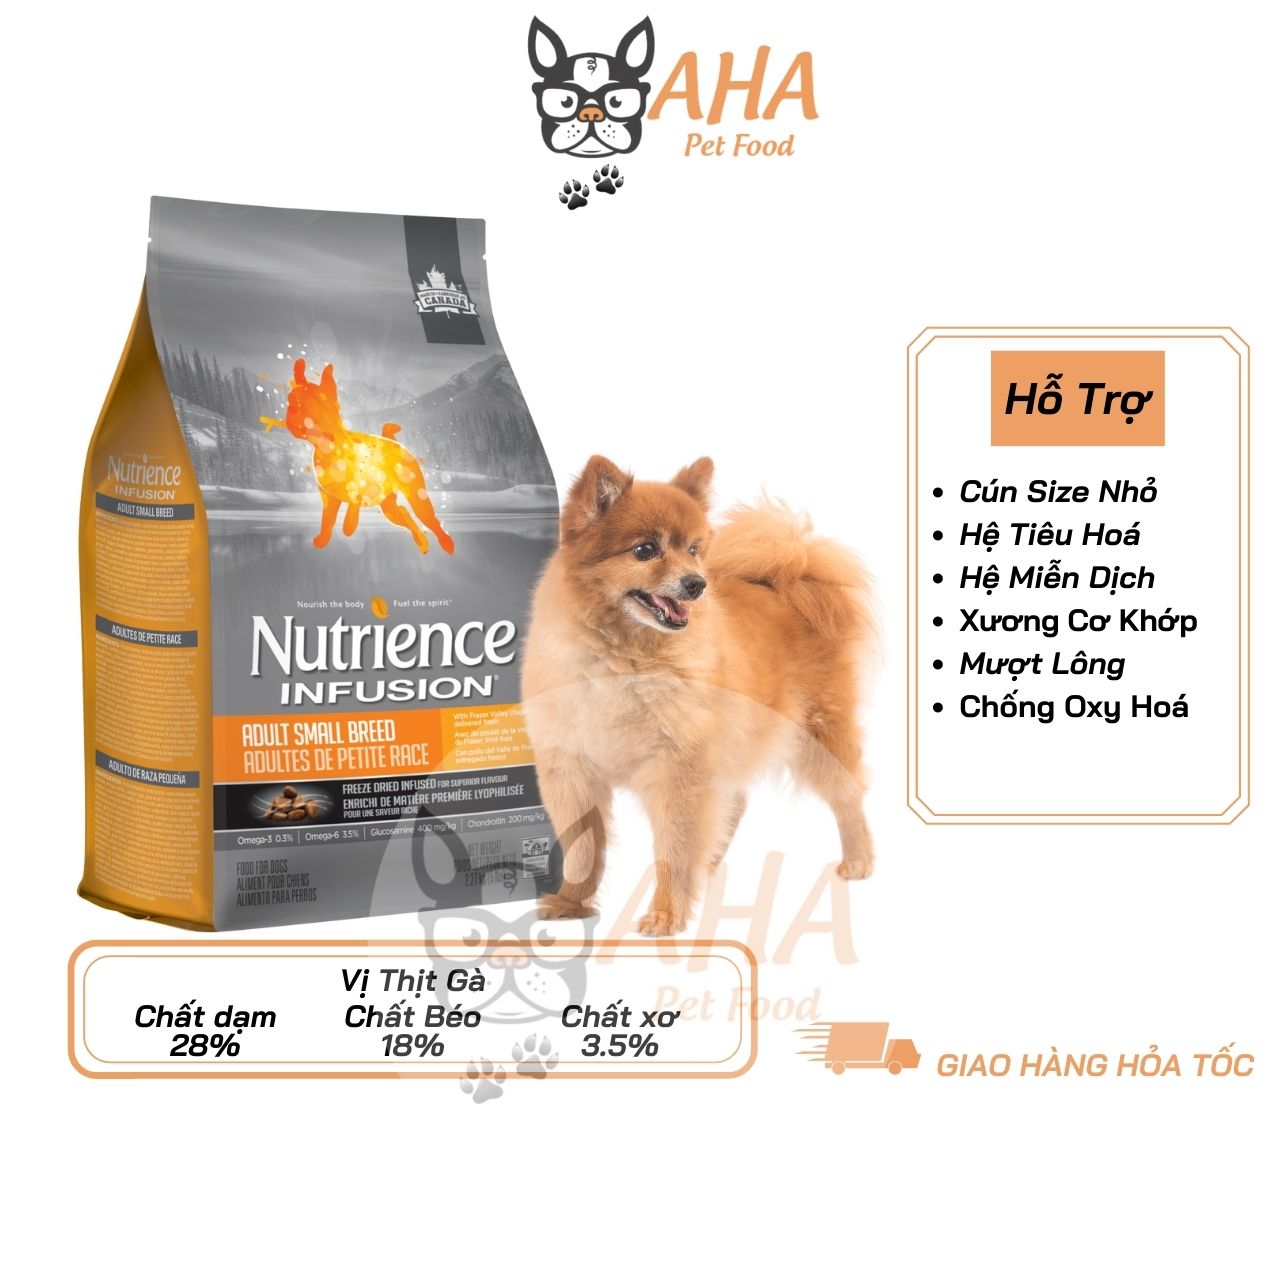 Dog food phốc-nutrience-chicken vegetables fruit natural aid digestion